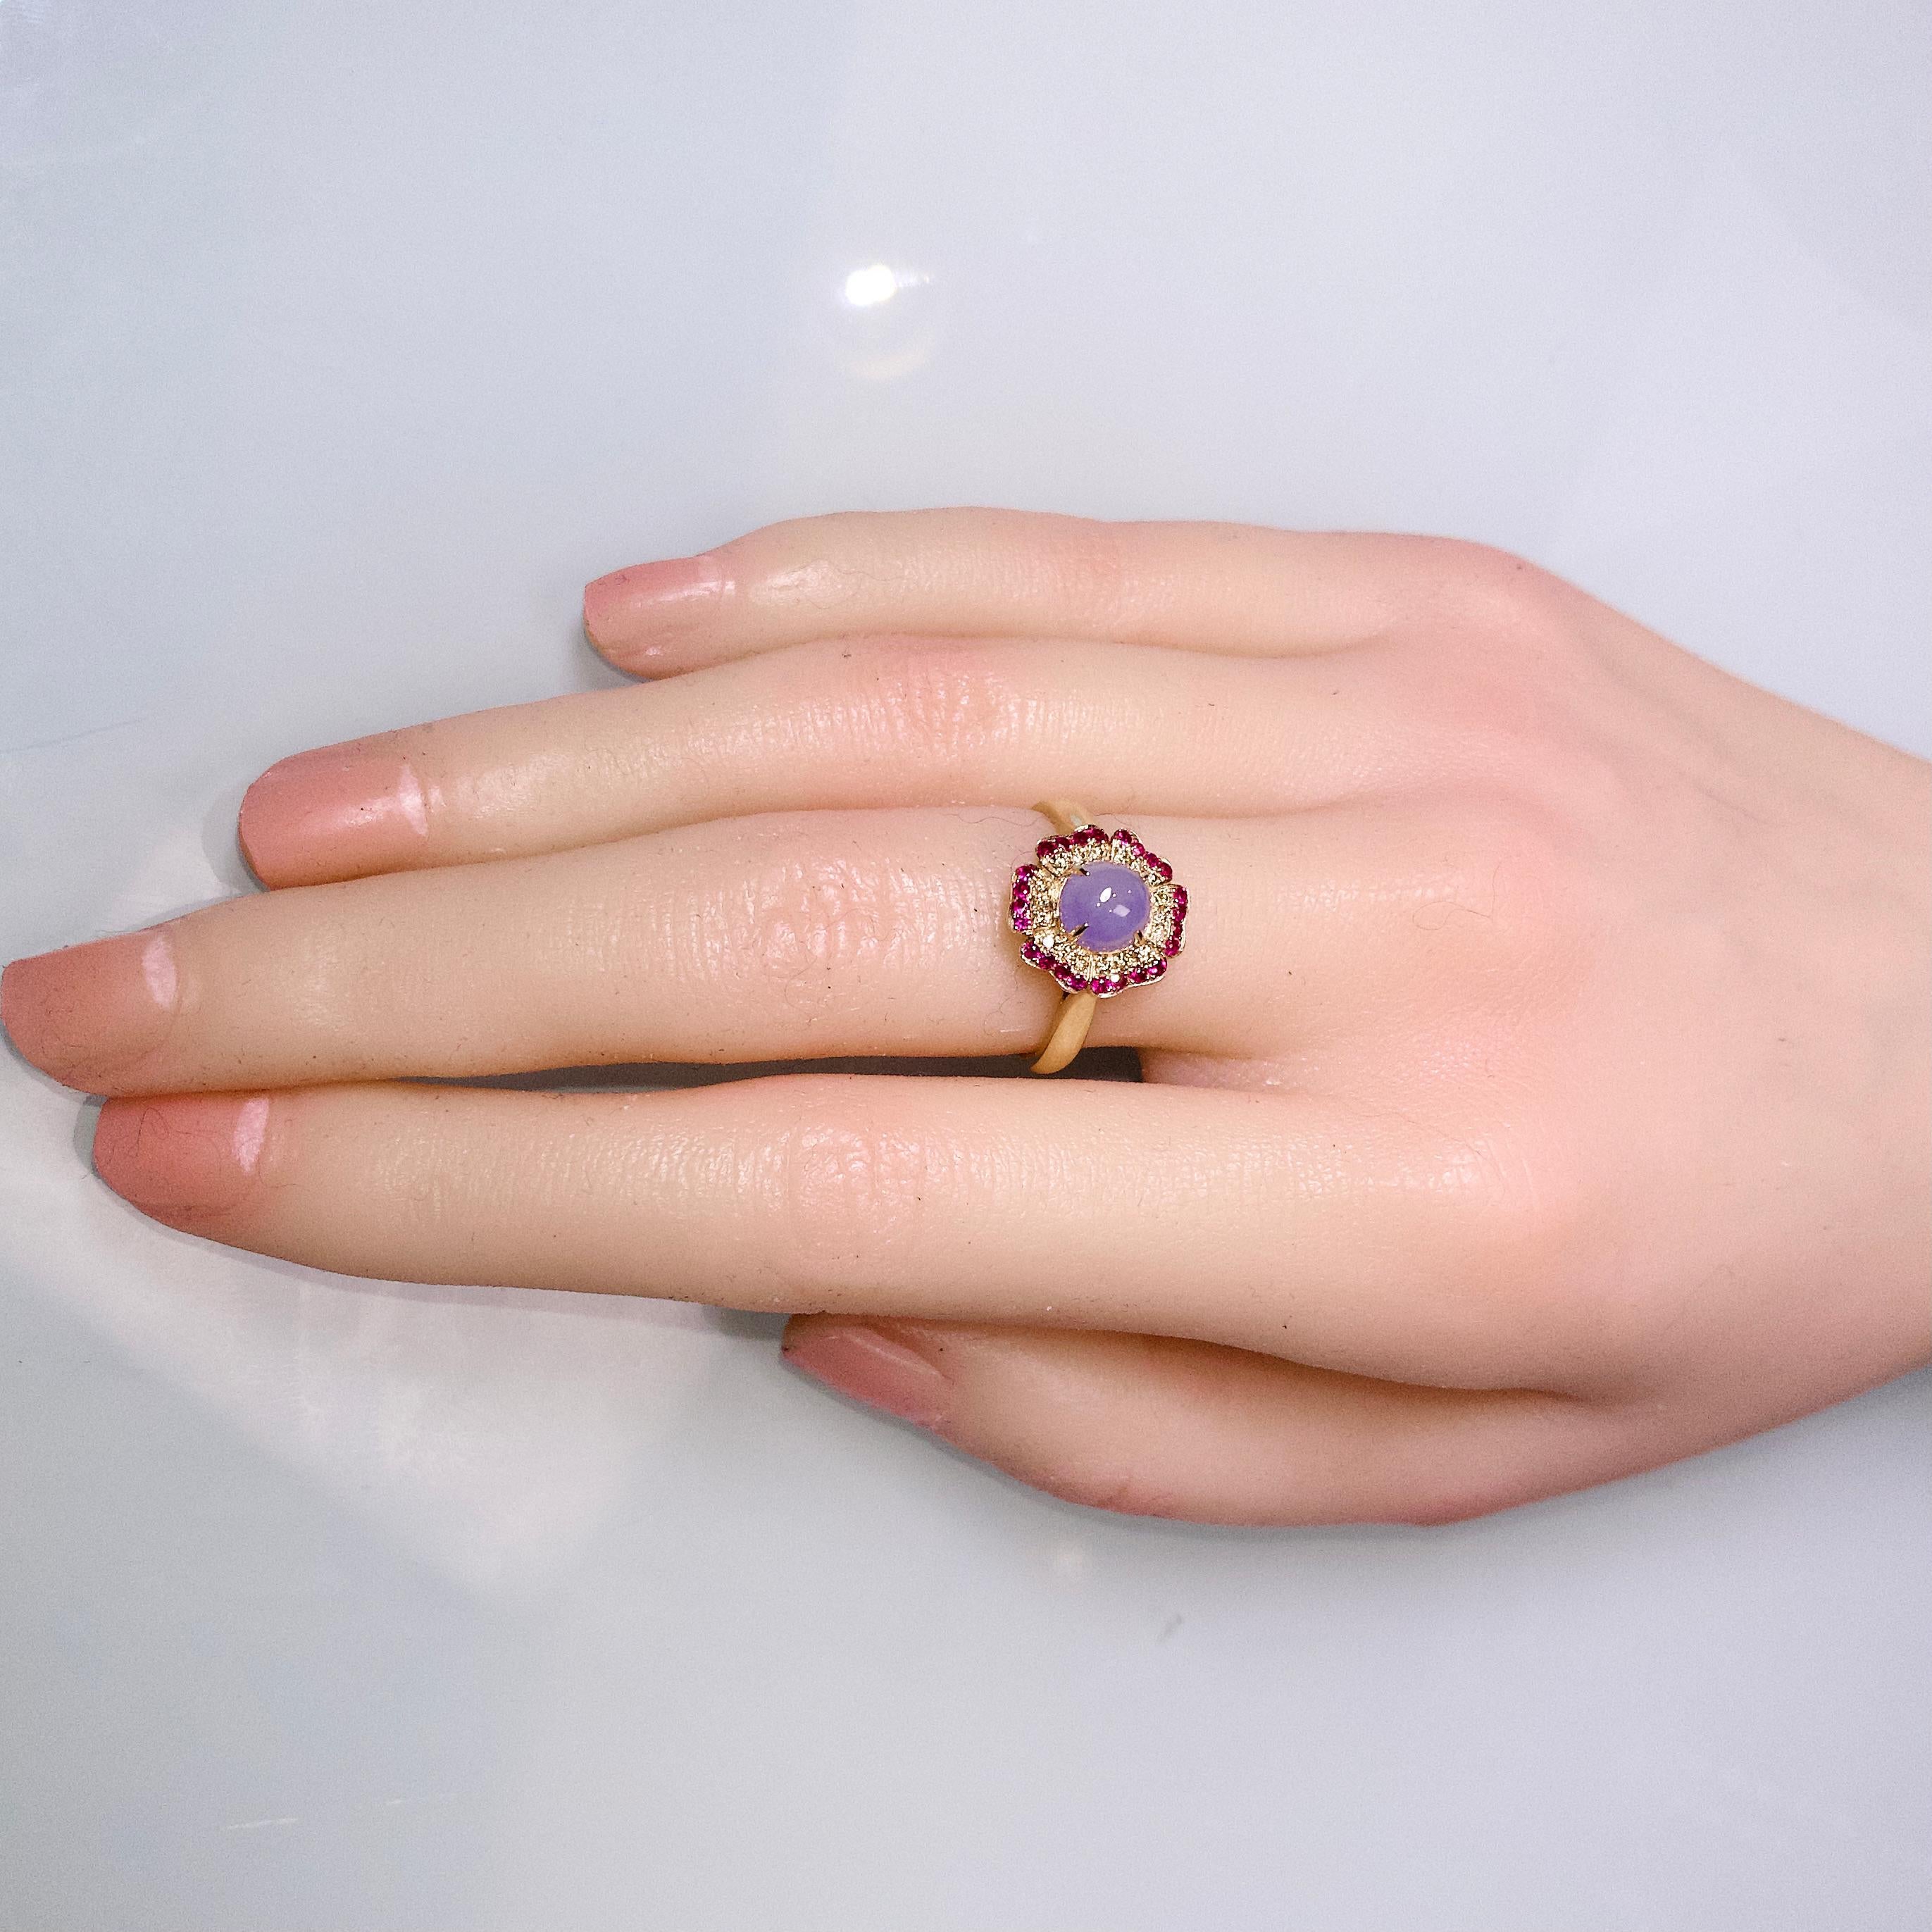 The Type A Lavender Jadeite Cabochon is sitting in the middle of a flower motif, with petals encrusted in Rubies and Diamonds. This is a very small and cute ring suitable for everyday wear.

Total ruby weight is 0.21 ct
Total Natural Diamond weight